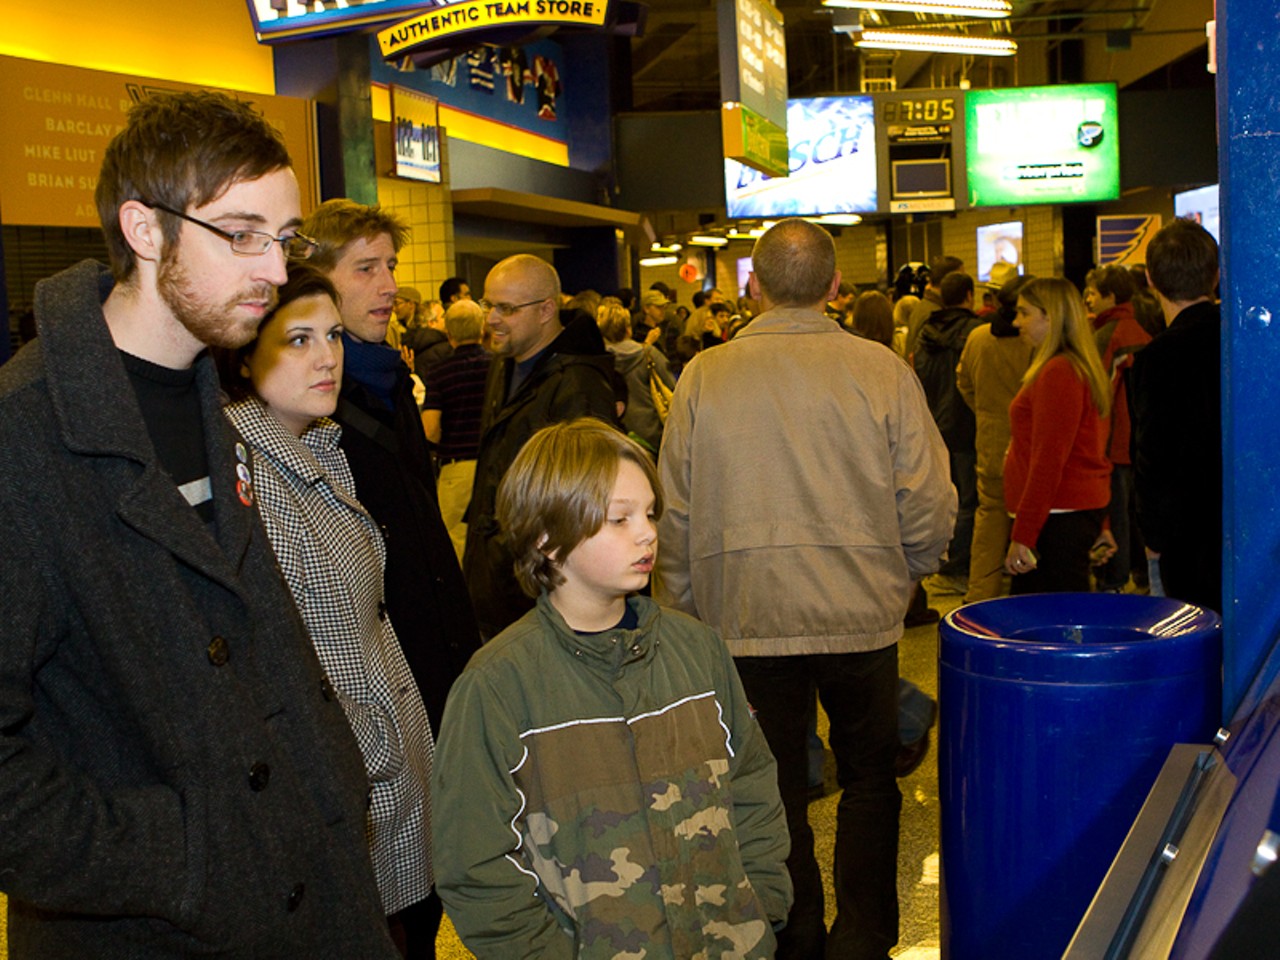 Star Wars fans gathered in the concourse of the Scottrade Center to catch a glimpse of memorabilia from the movies.